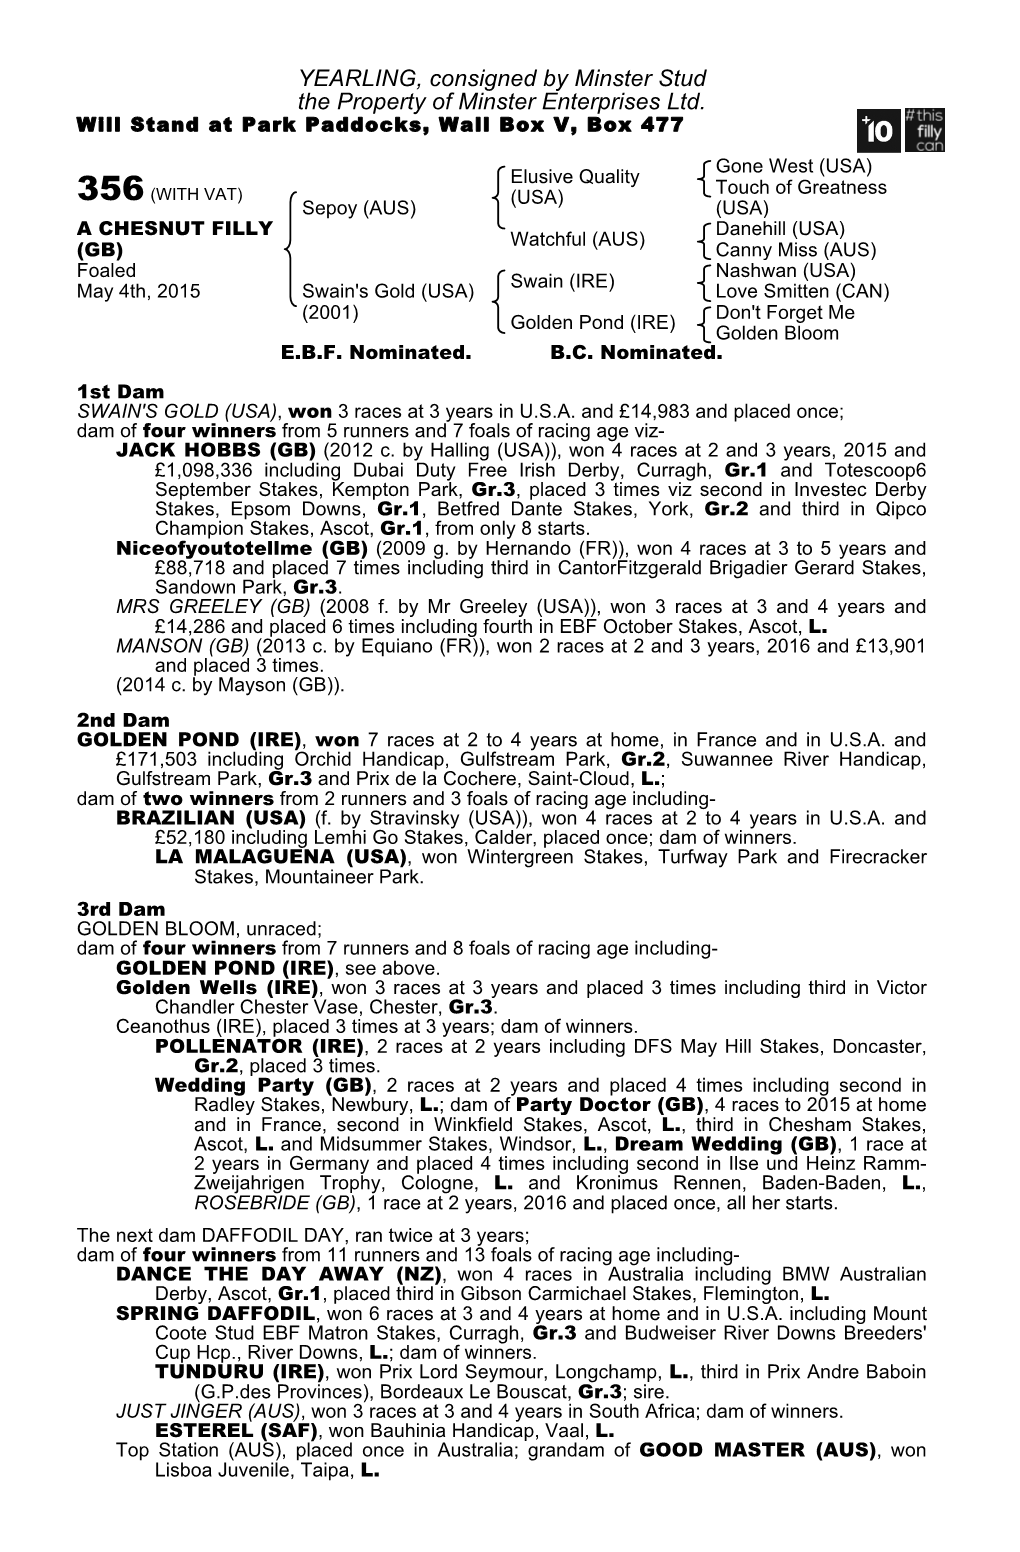 YEARLING, Consigned by Minster Stud the Property of Minster Enterprises Ltd. Will Stand at Park Paddocks, Wall Box V, Box 477